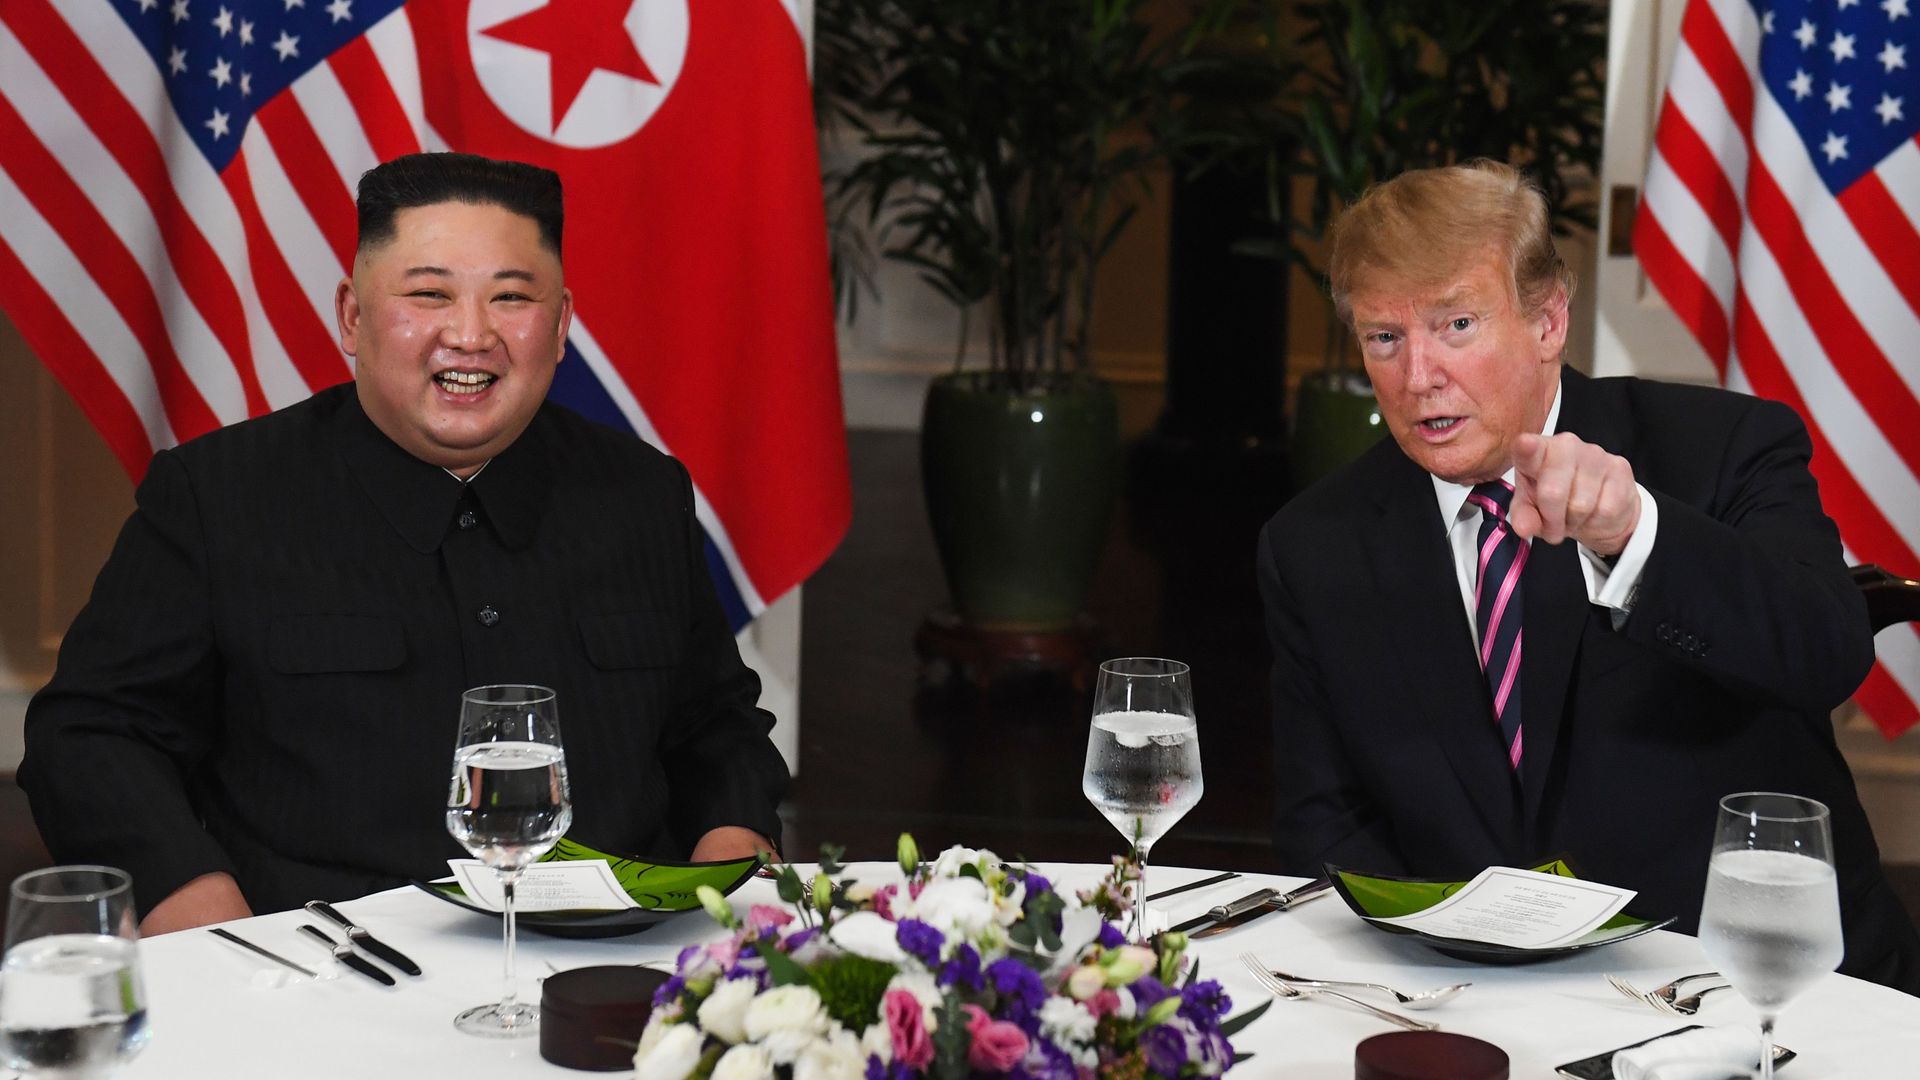 North Korea leader Kim Jong-un and President Trump sit down for a second summit.